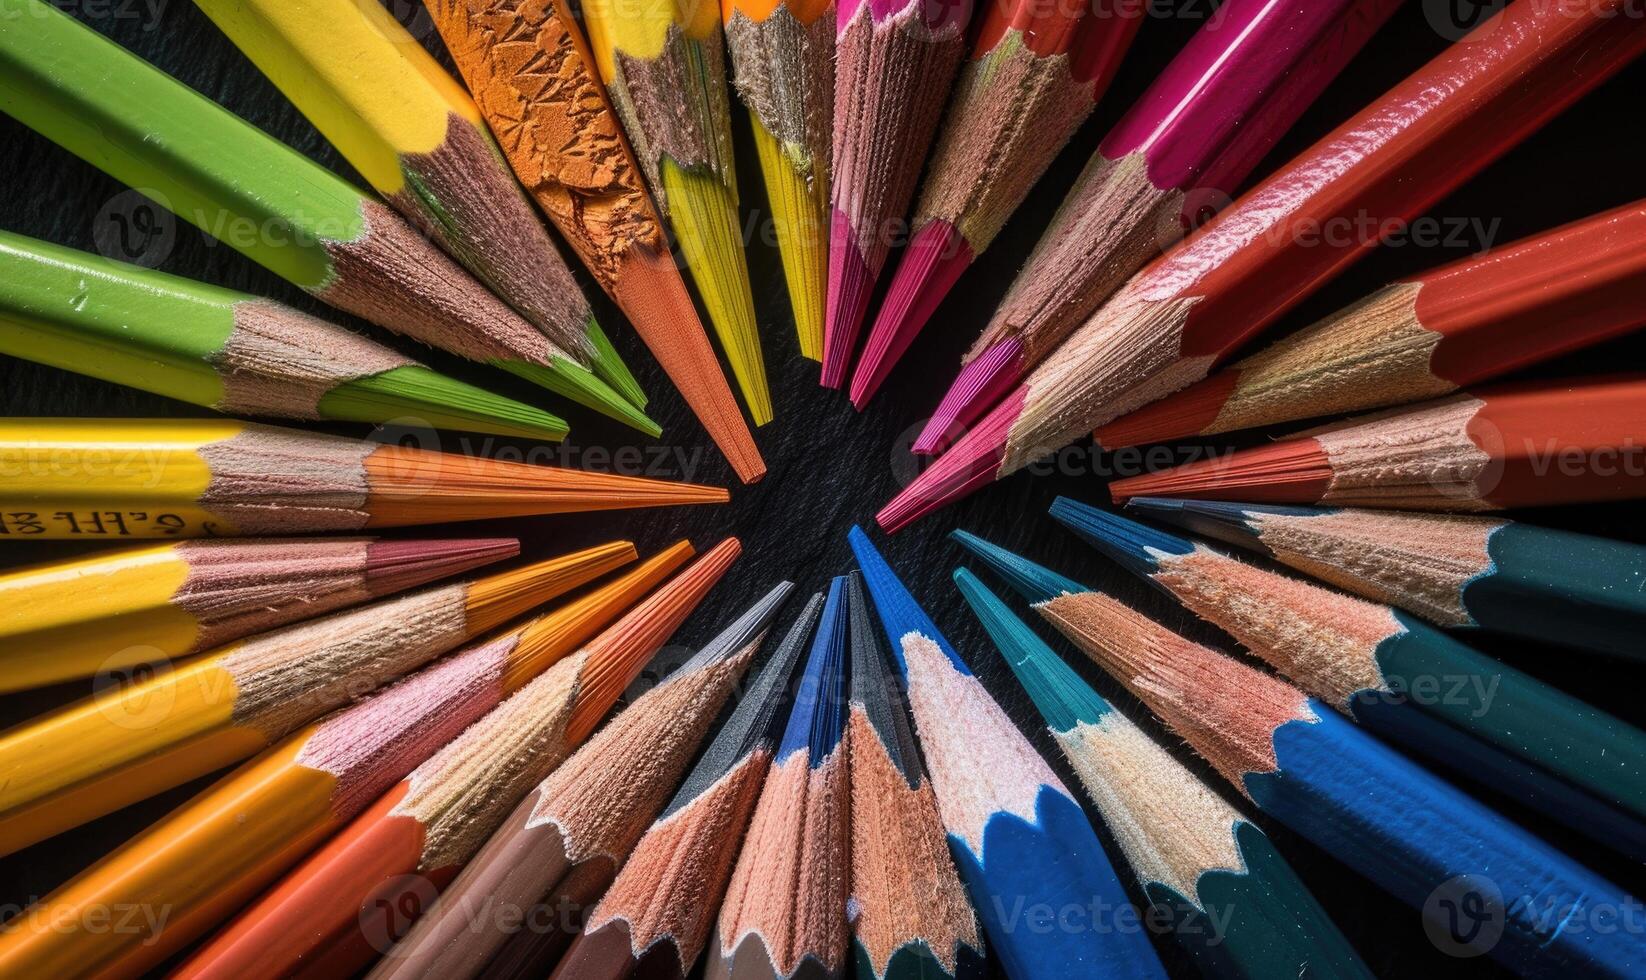 Colored pencils arranged in a circular pattern photo